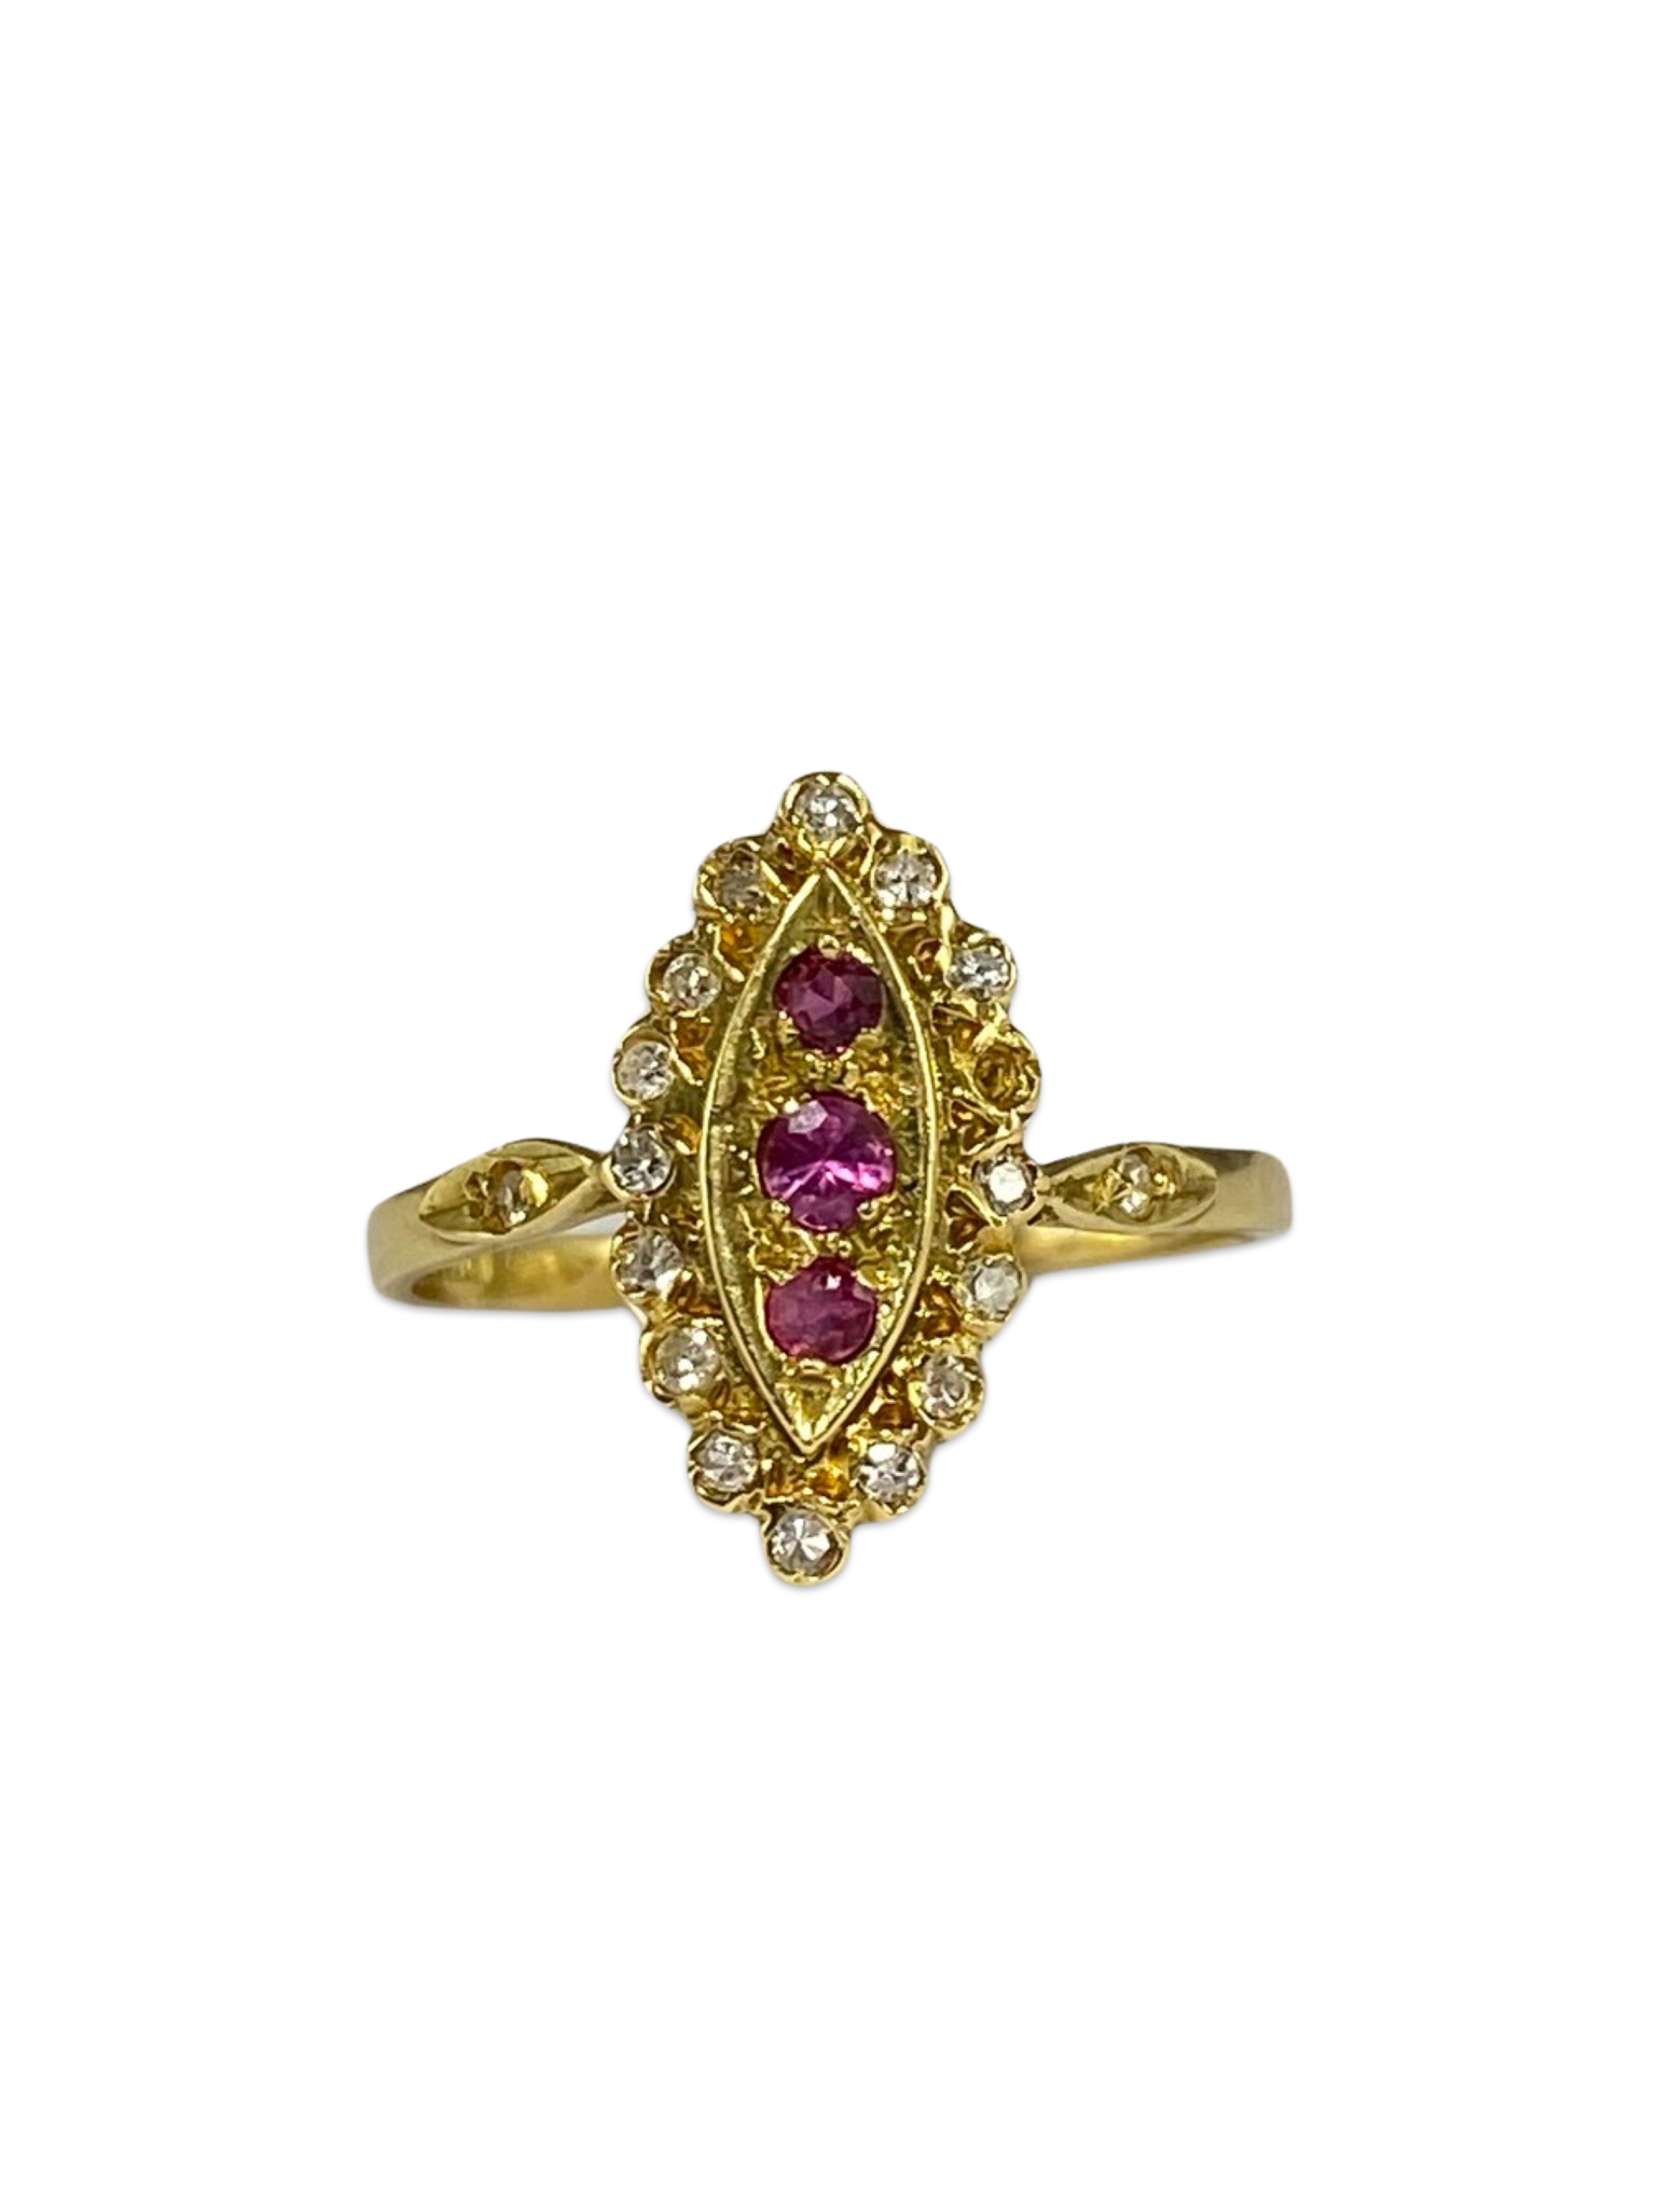 18ct Yellow Gold London 1989 Fancy Design Pink Stone and Diamond ring weighing 3.99 grams size M 1/2